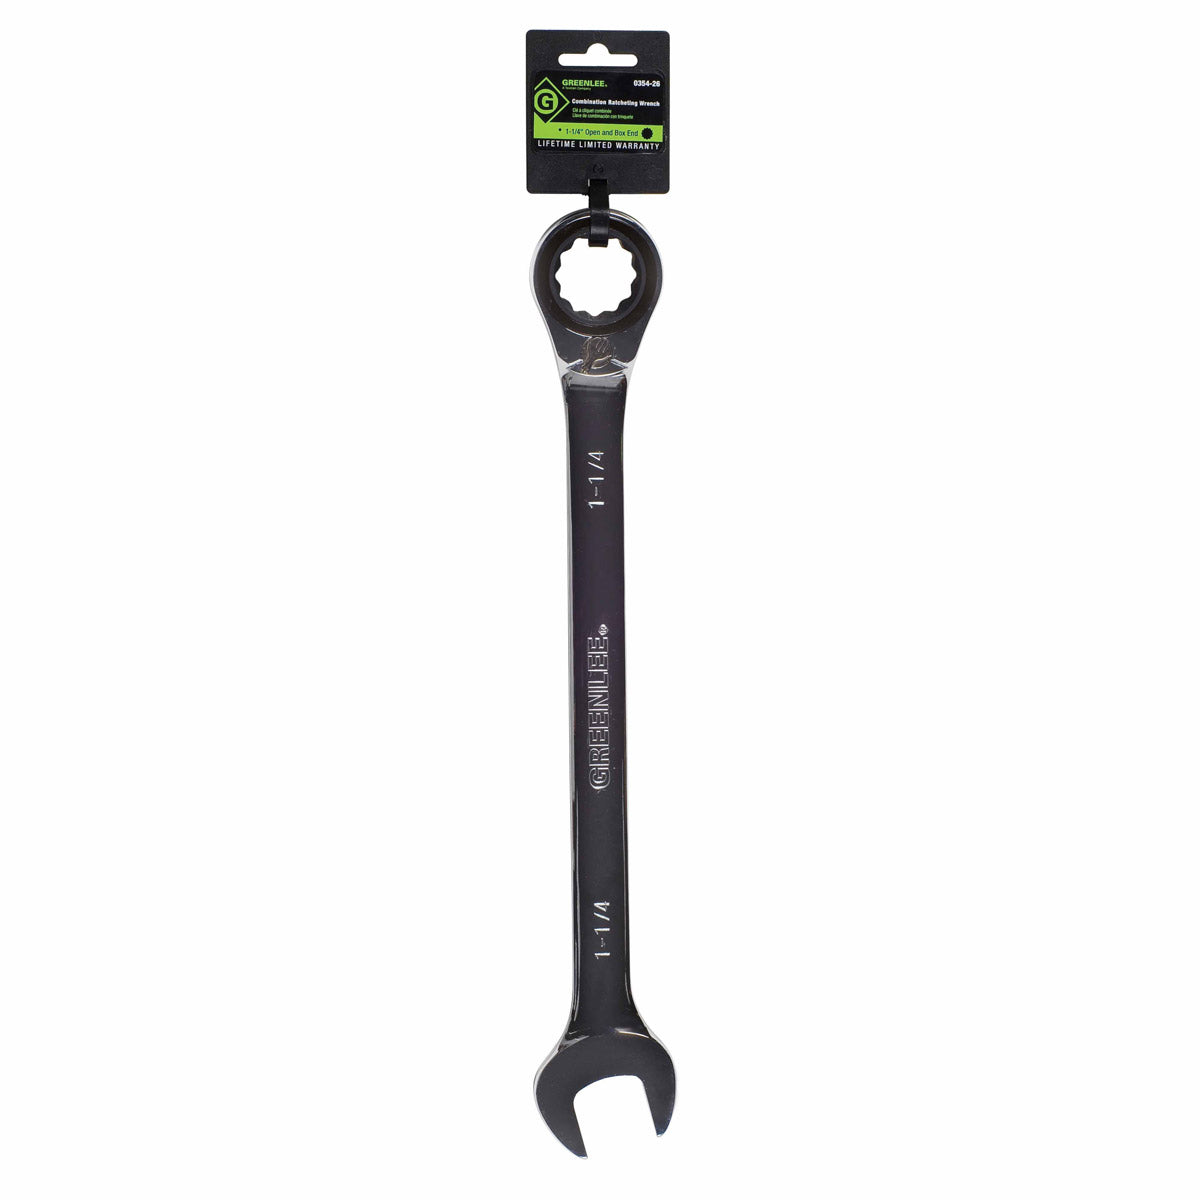 Greenlee 0354-26 1-1/4" Combination Ratcheting Wrench